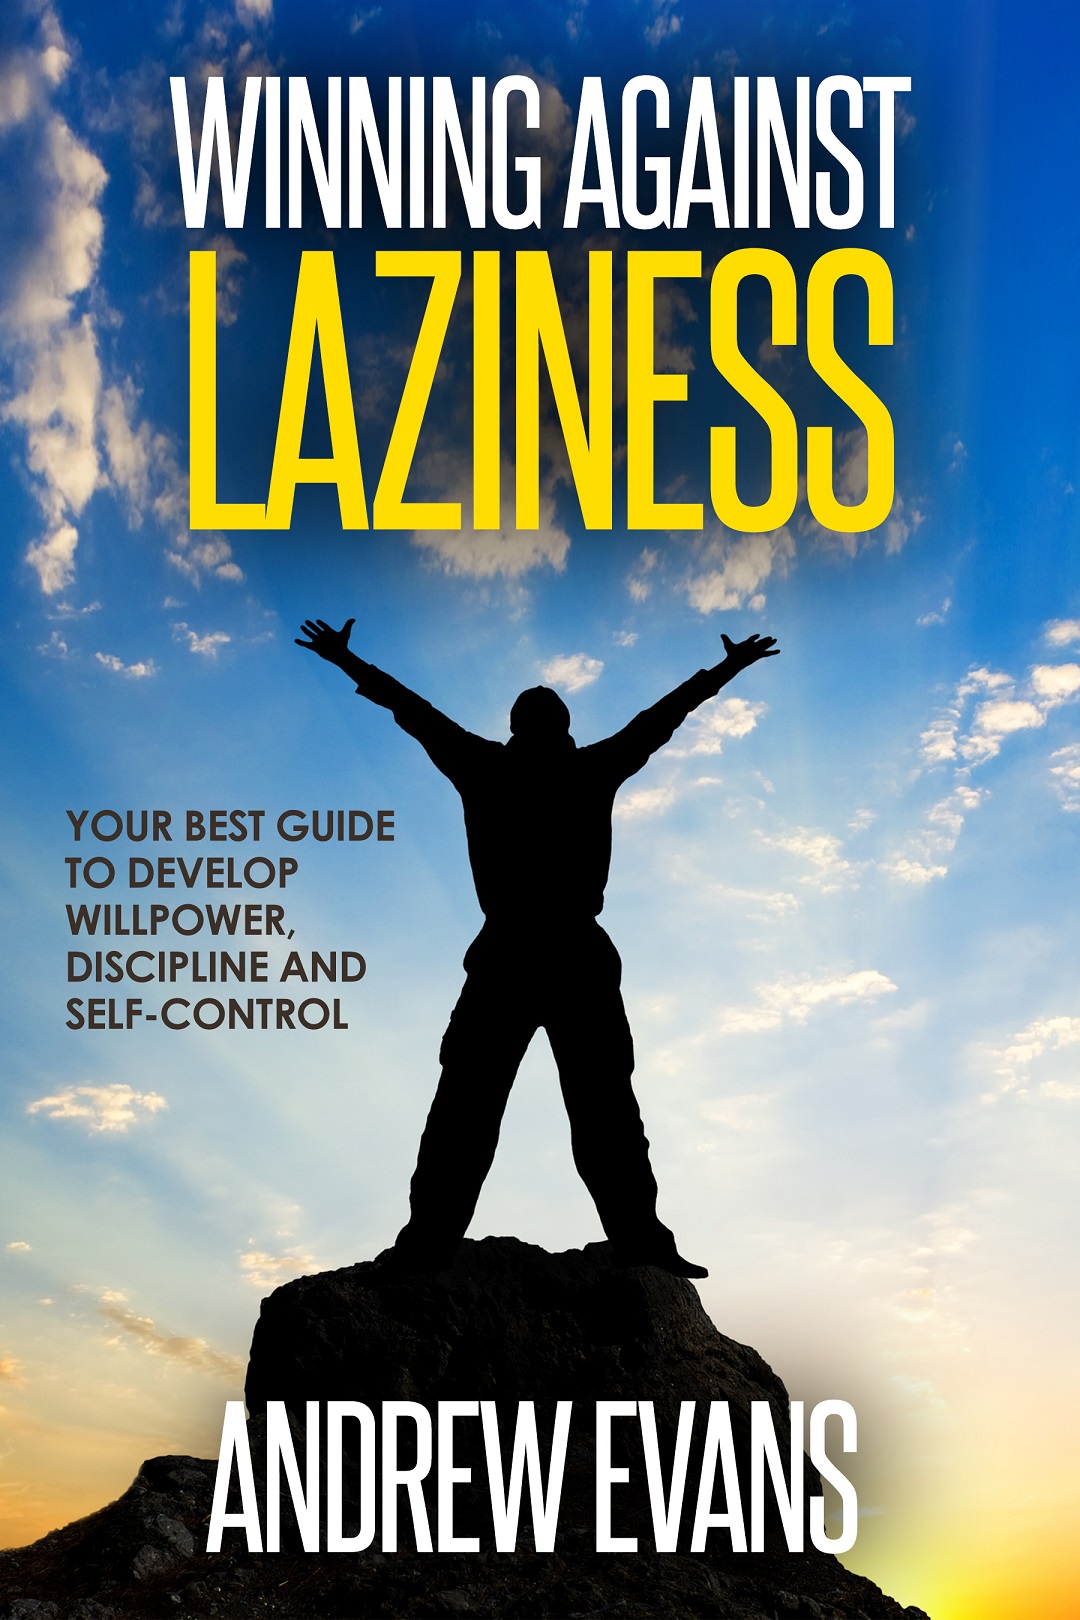 FREE: Winning Against Laziness: Your Best Guide To Develop Willpower, Discipline and Self-Control by Andrew Evans